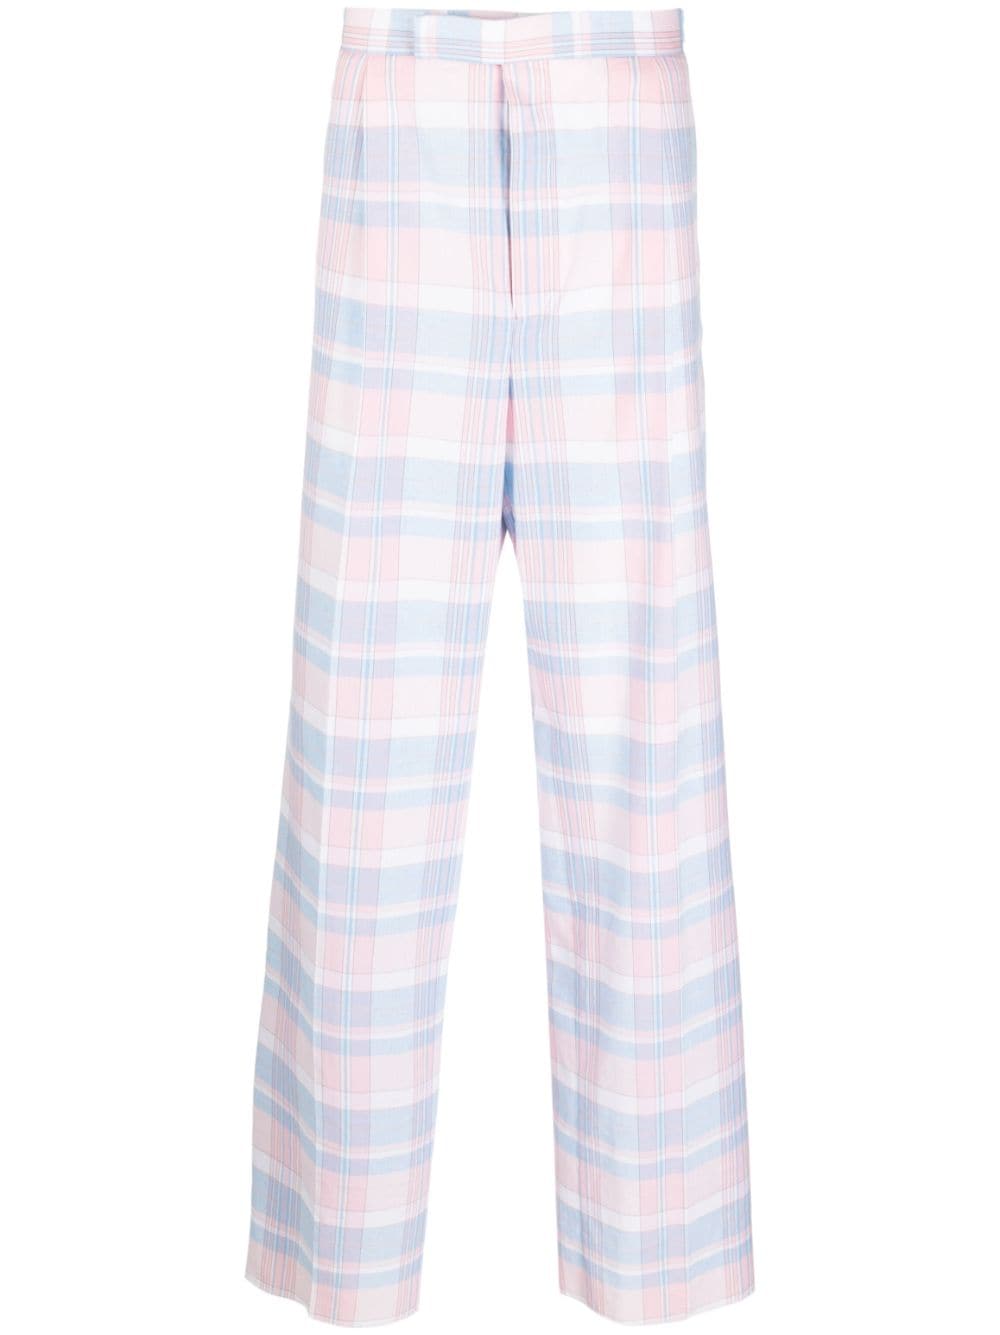 Thom Browne check cotton trousers - Pink von Thom Browne